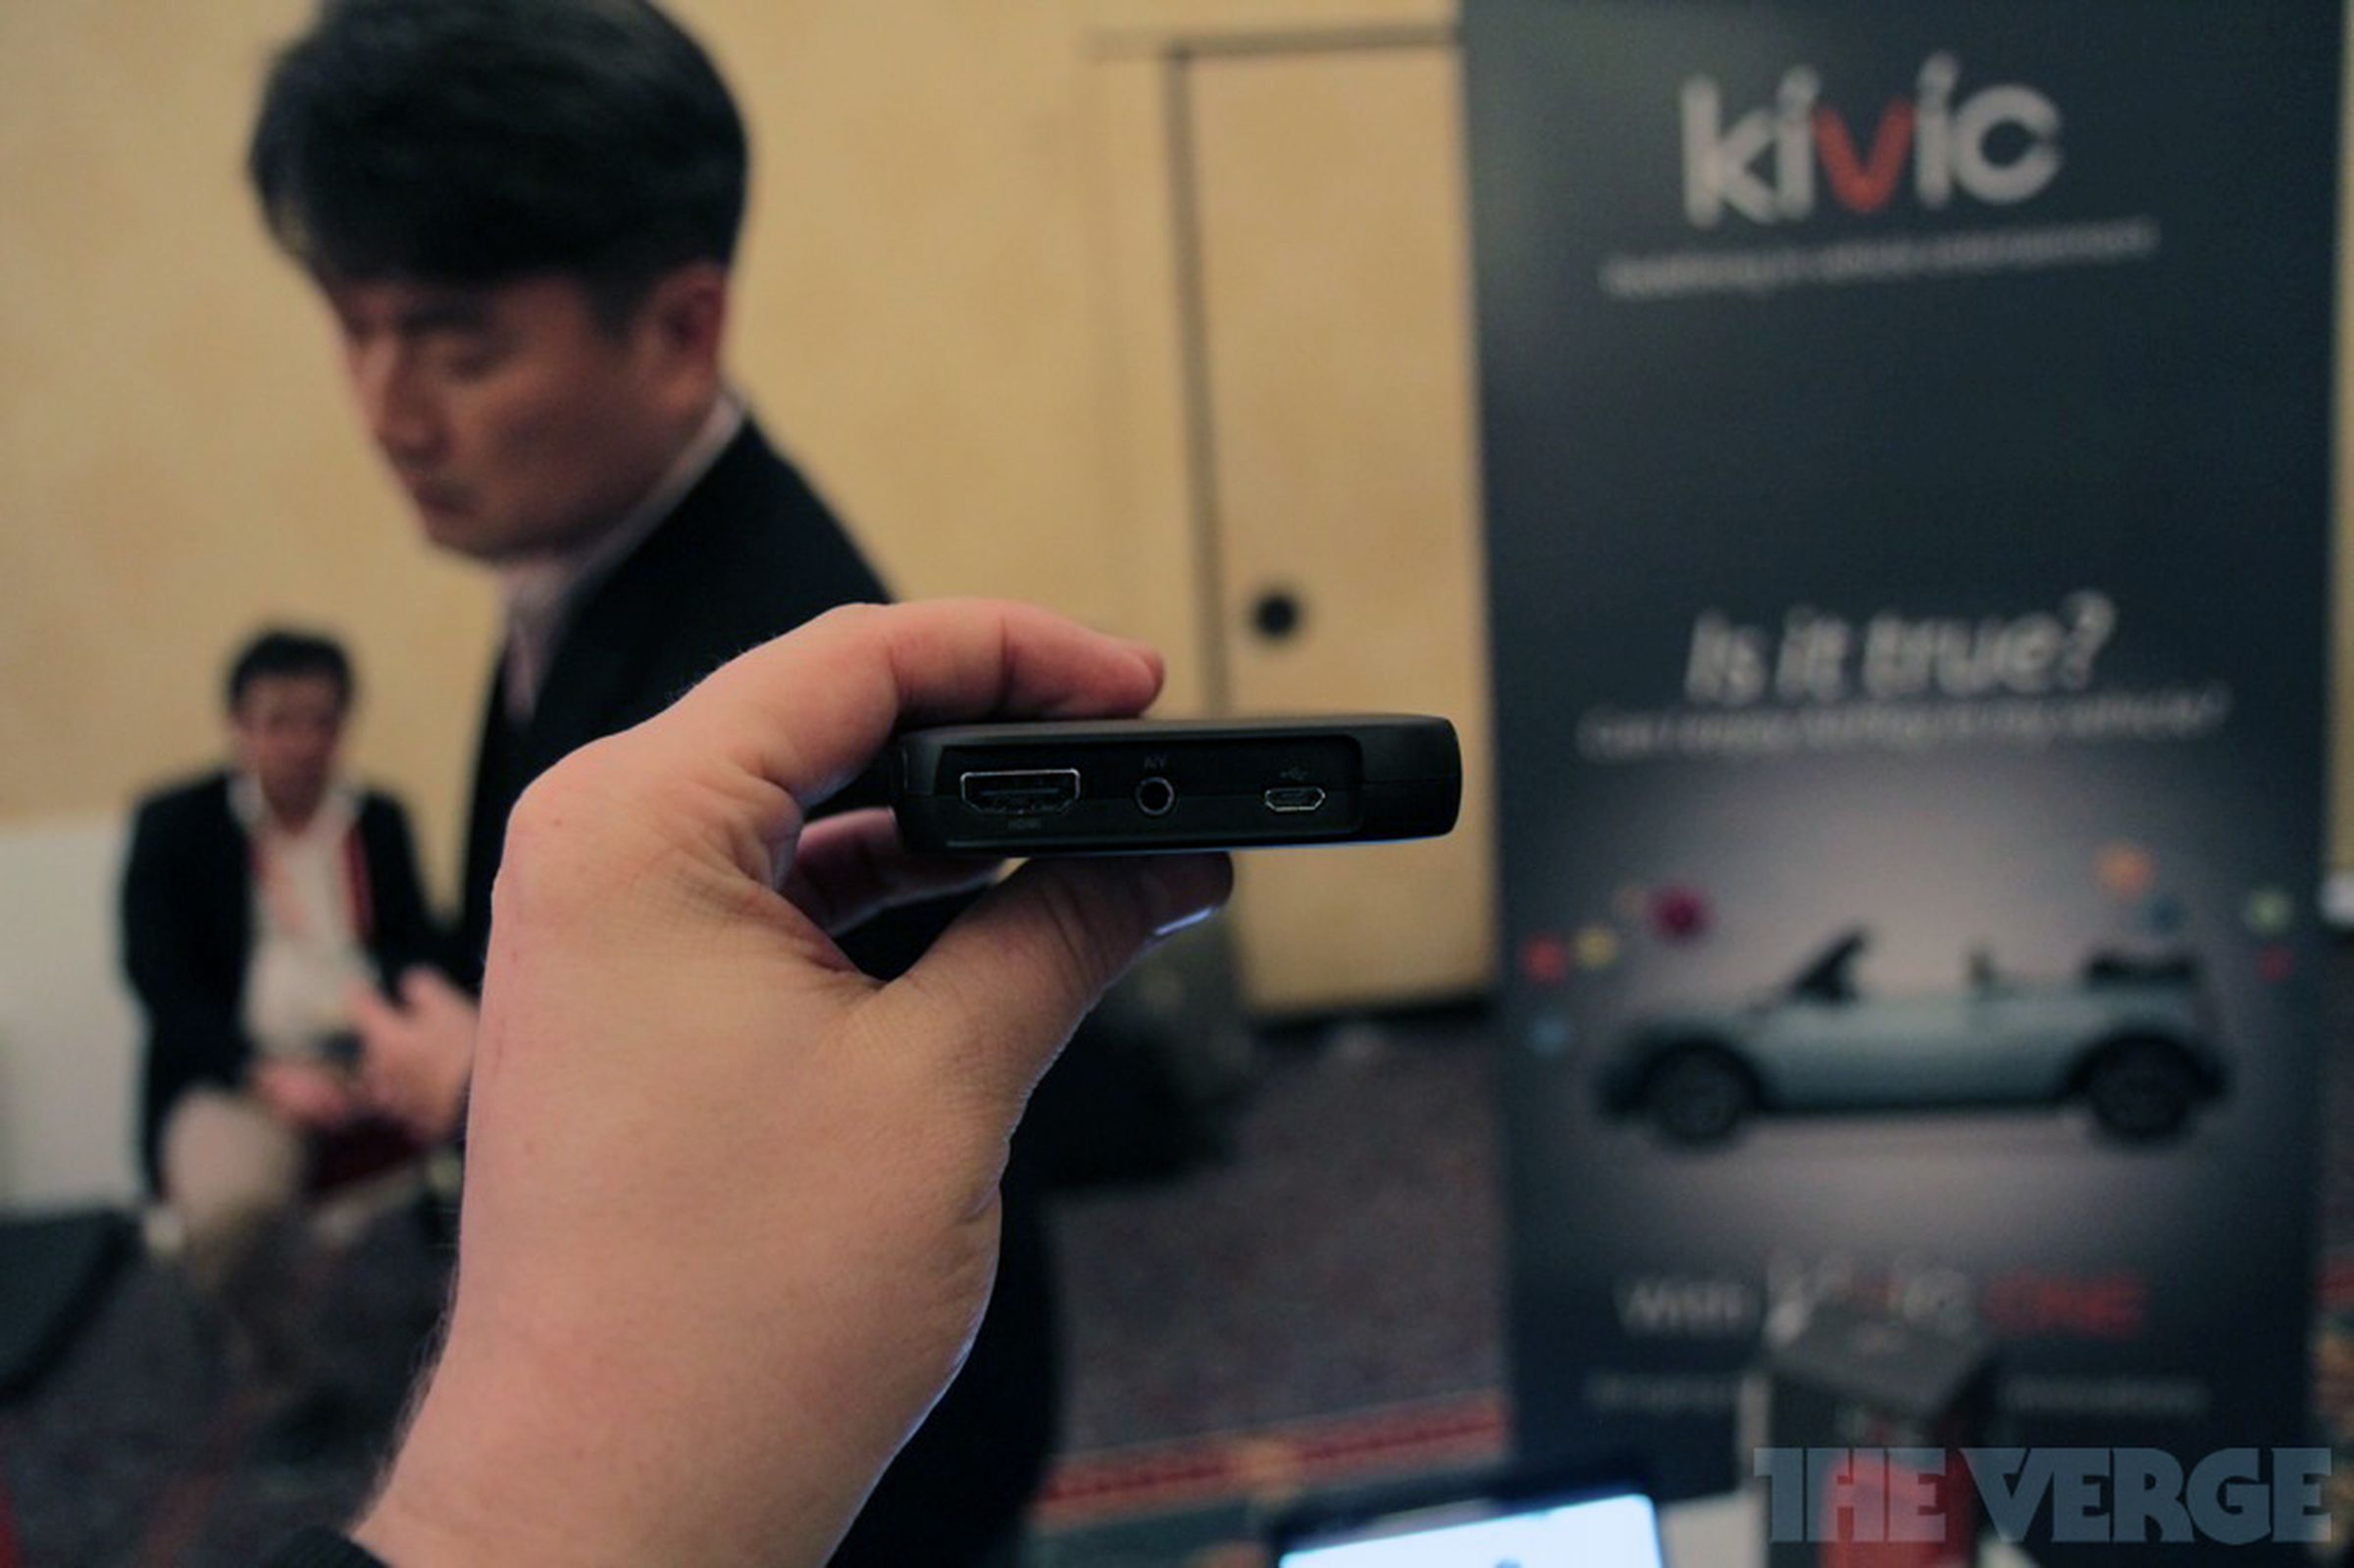 Kivic One hands-on